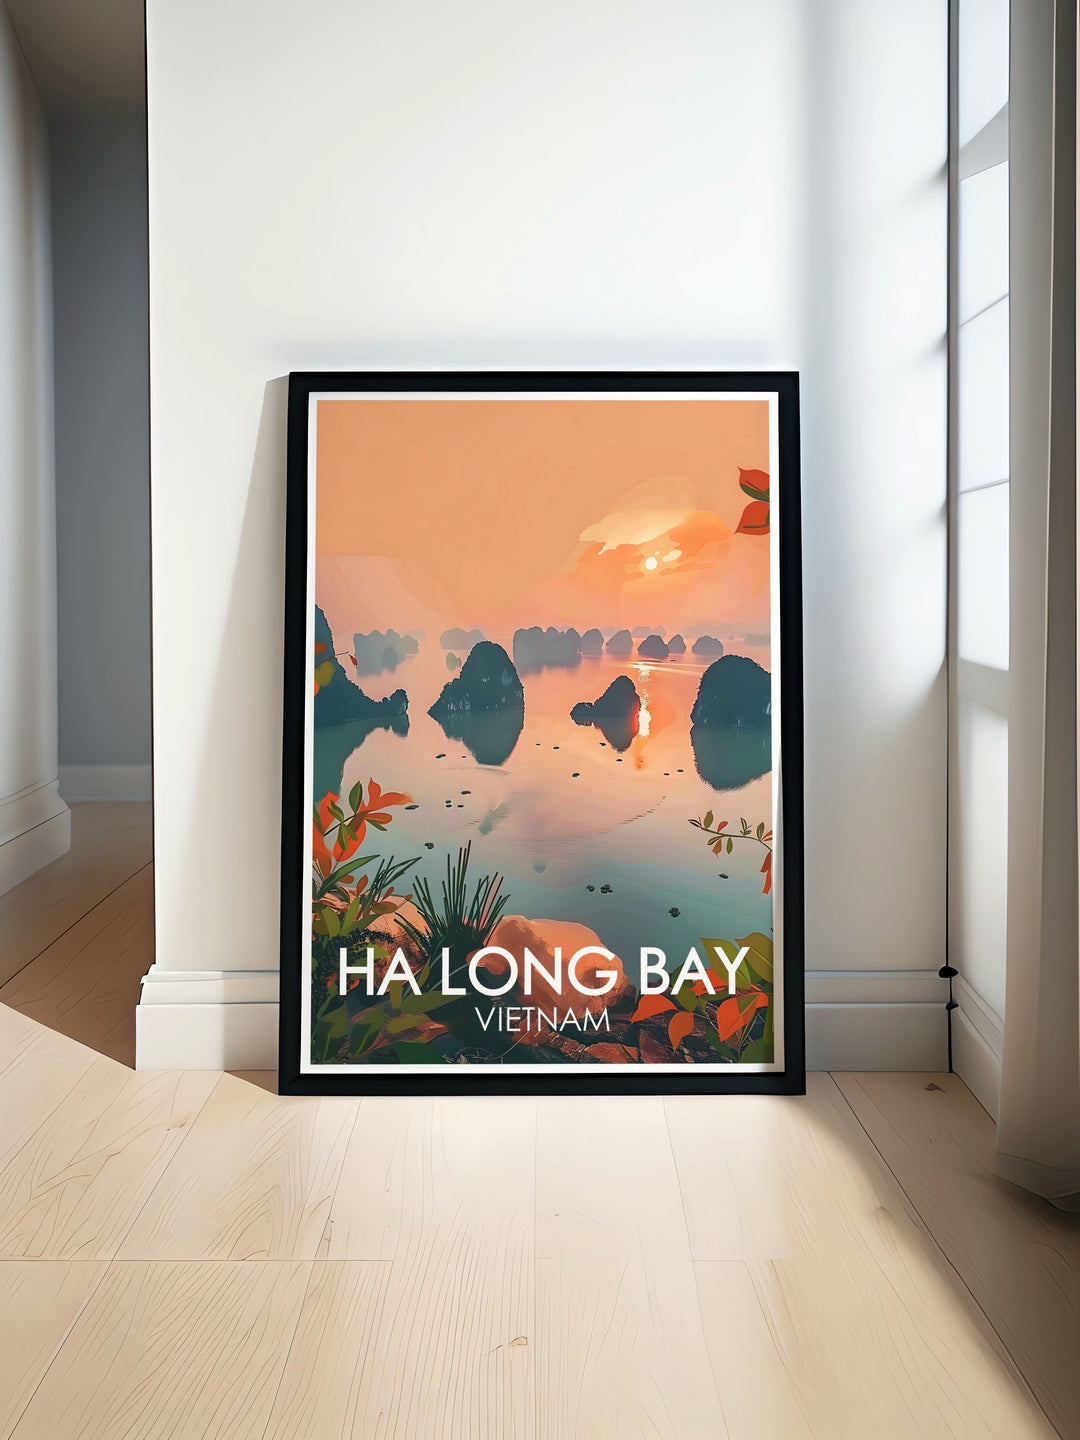 Featuring the iconic seascape of Ha Long Bay, this travel poster captures the essence of its tranquil beauty and thrilling adventures, perfect for creating a serene atmosphere in any room.